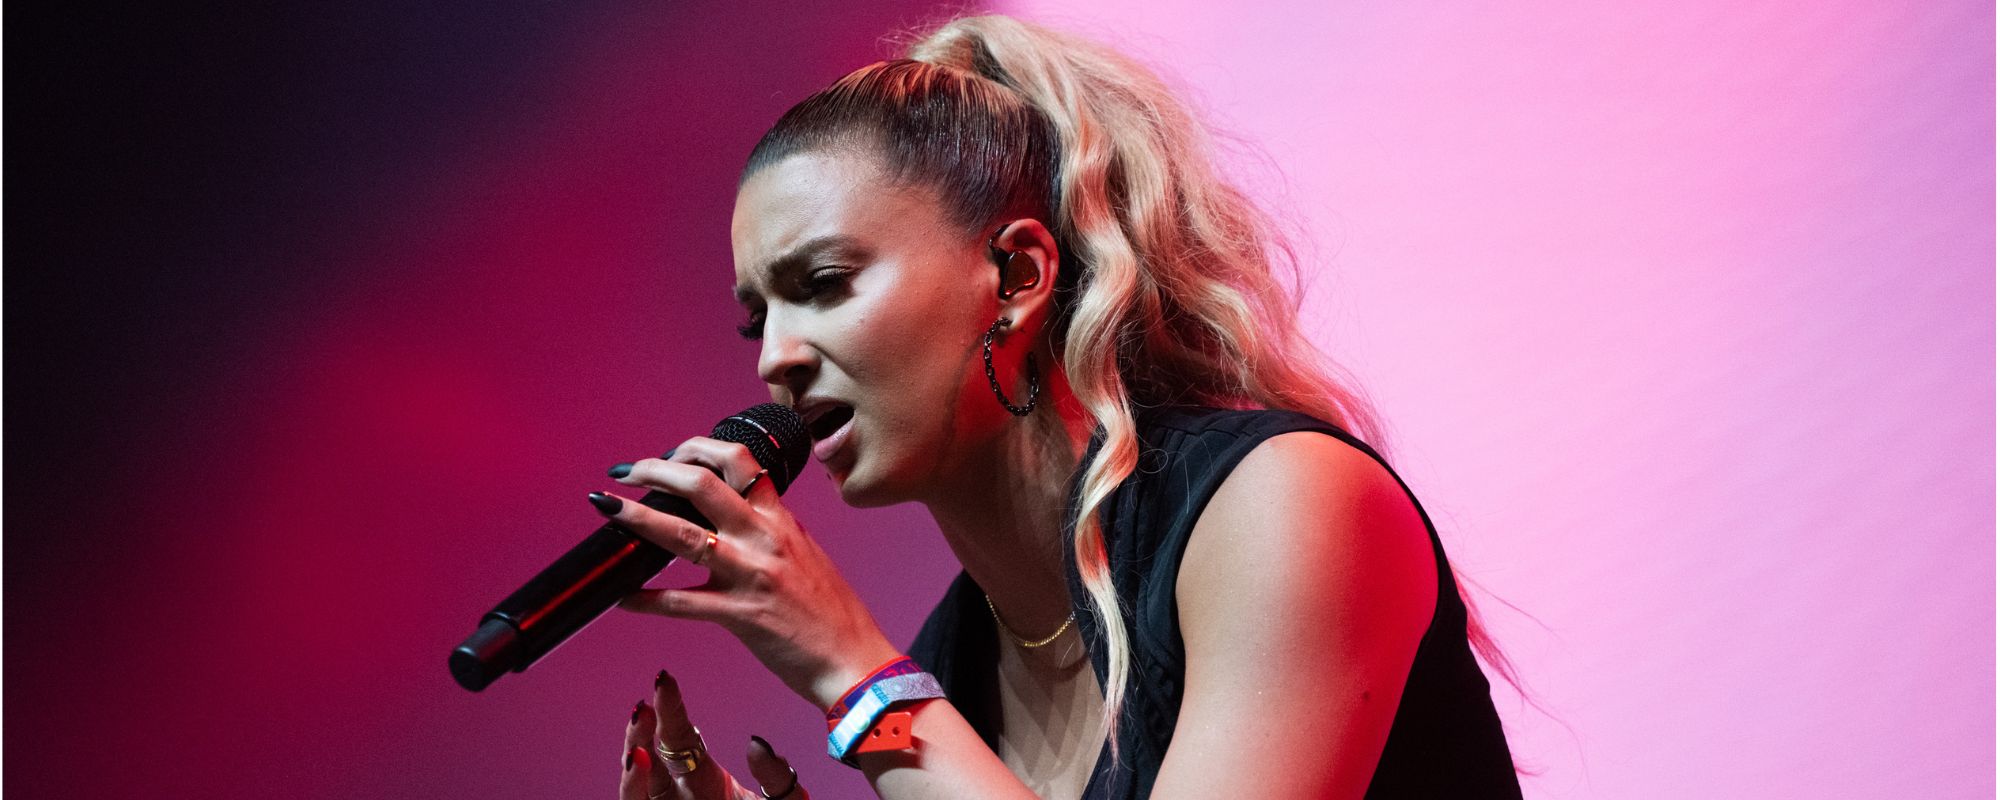 Tori Kelly Updates Fans with Handwritten Note About Health Scare